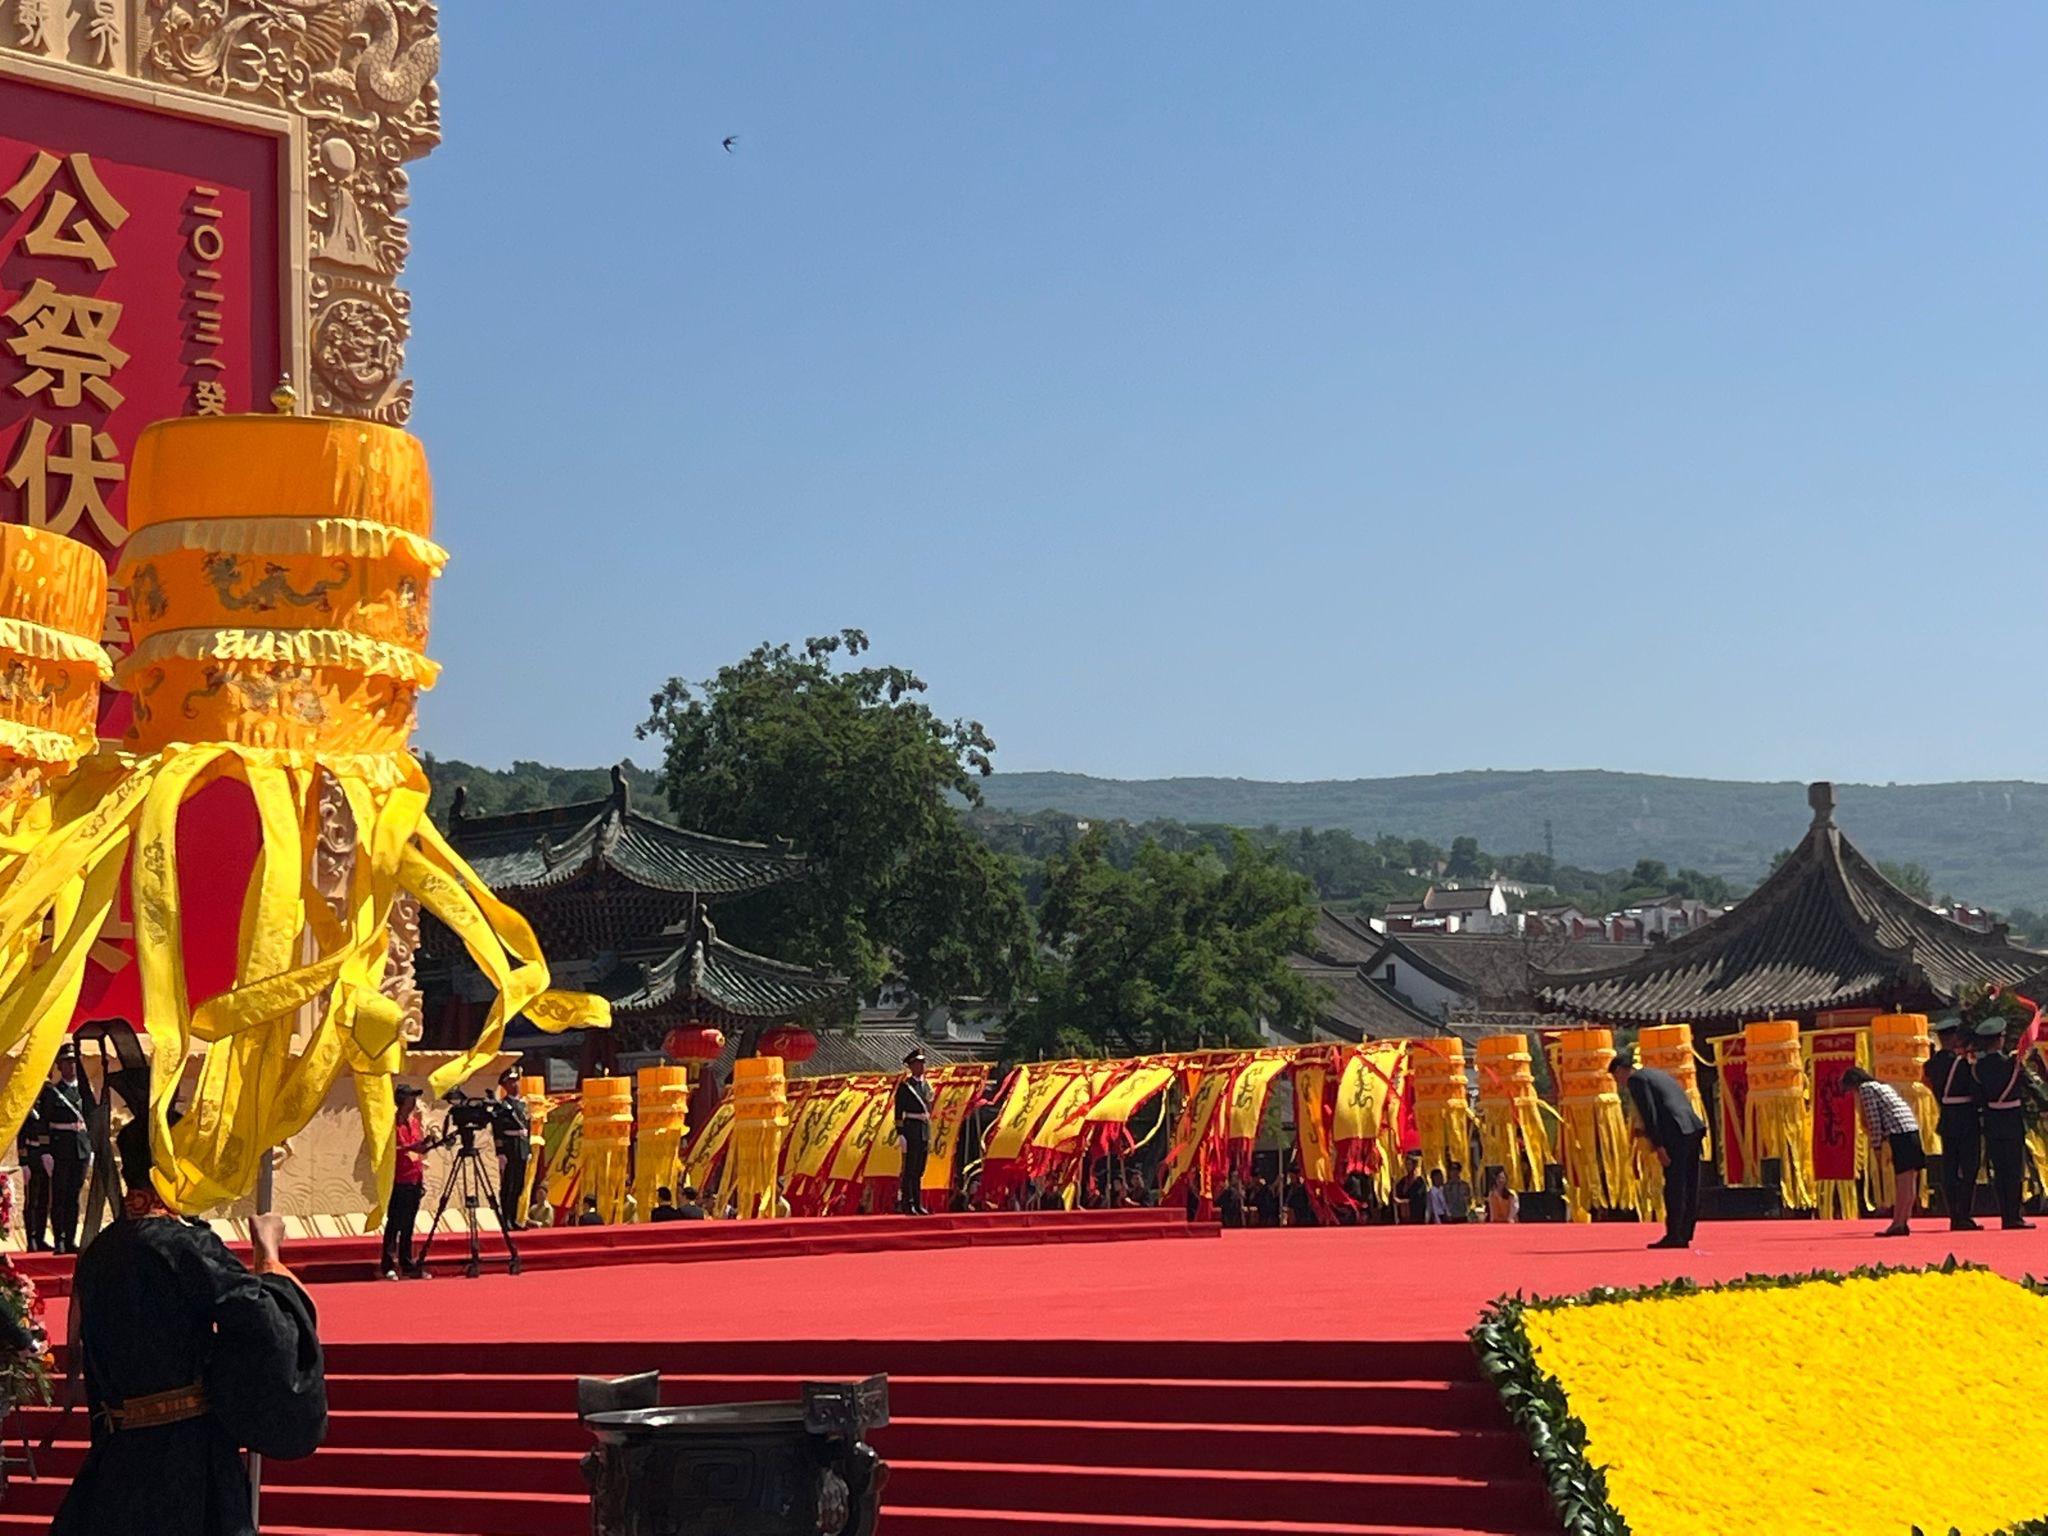 The Secretary for Culture, Sports and Tourism, Mr Kevin Yeung, today (June 22) attended the Public Fuxi Commemoration Ceremony 2023 in Tianshui City in Gansu Province on behalf of the Hong Kong Special Administrative Region Government. He presented flowers at the ceremony.